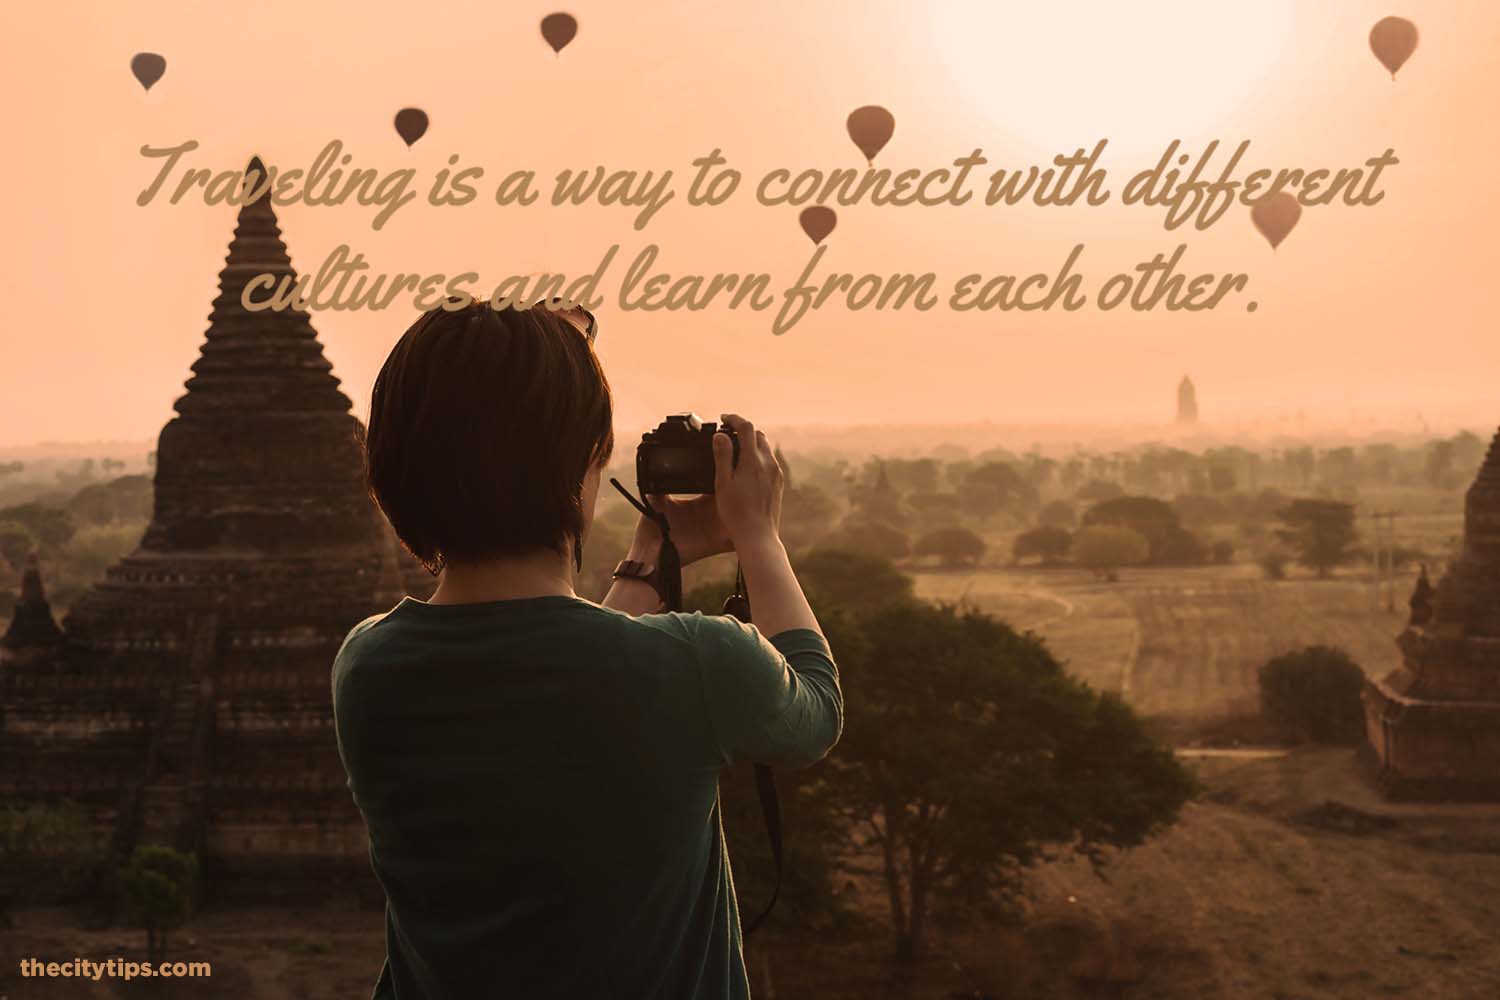 "Traveling is a way to connect with different cultures and learn from each other." by Anonymous